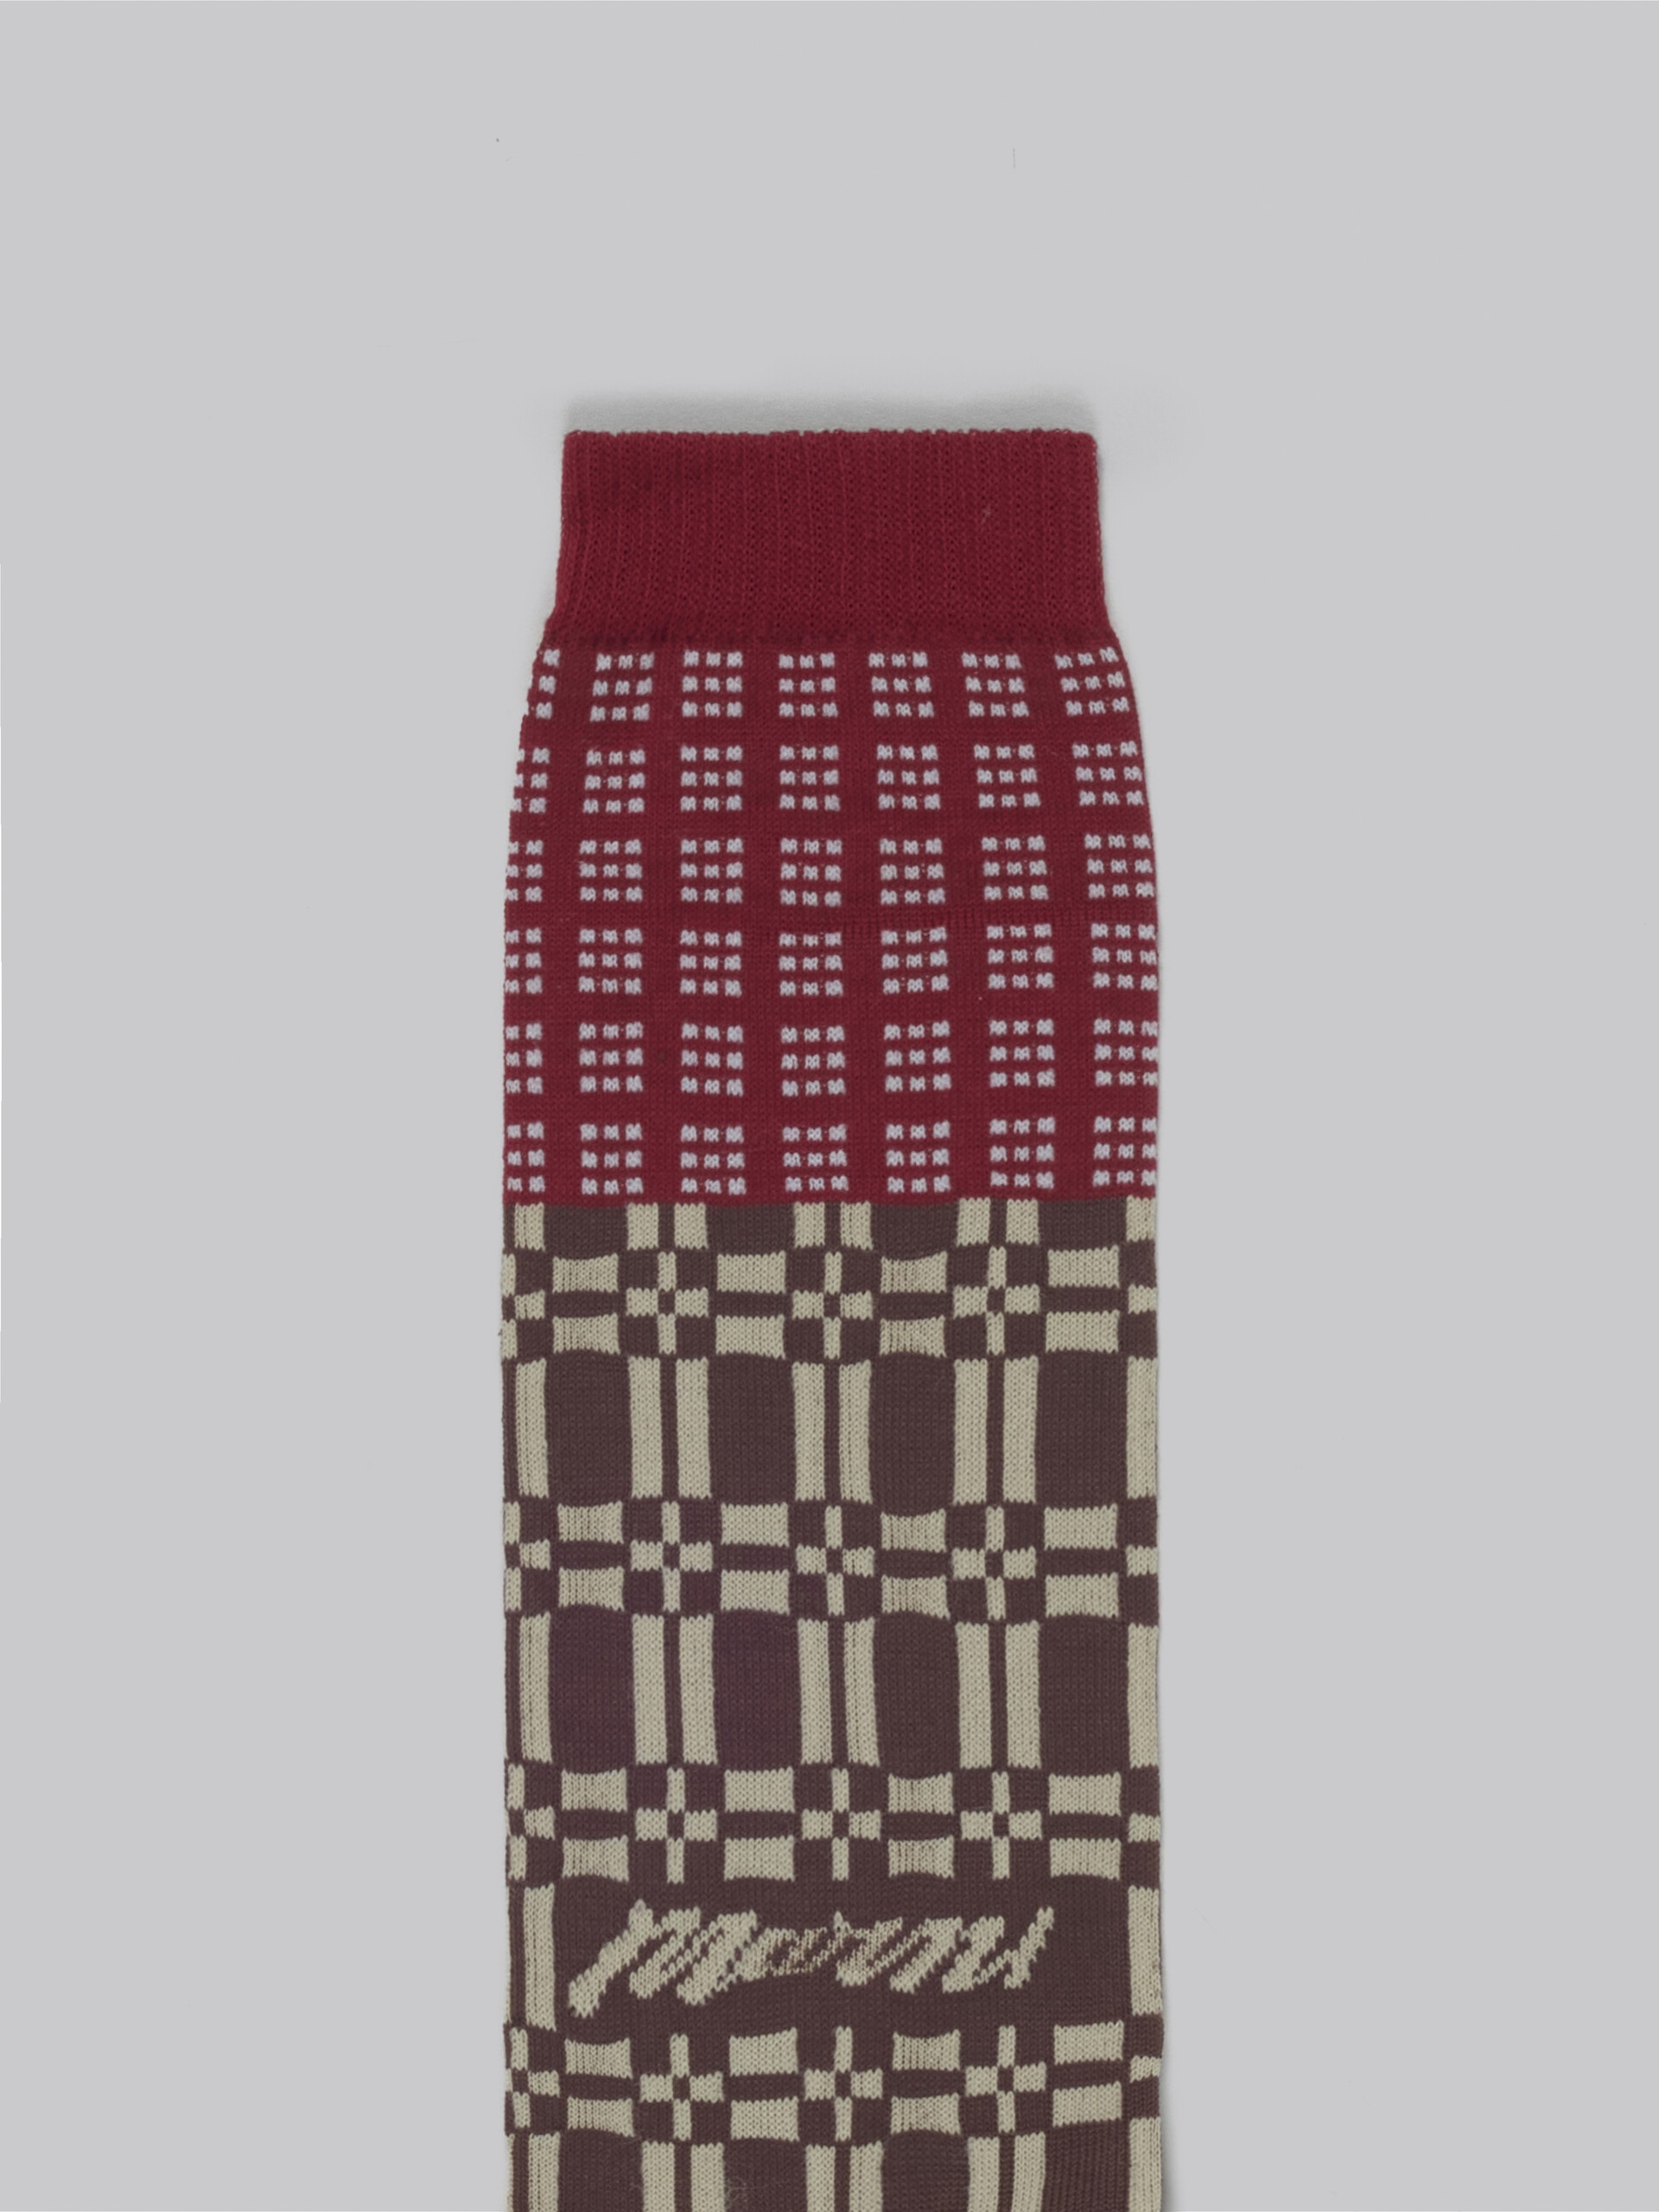 RED SOCKS WITH GEOMETRIC PATTERNS - 3